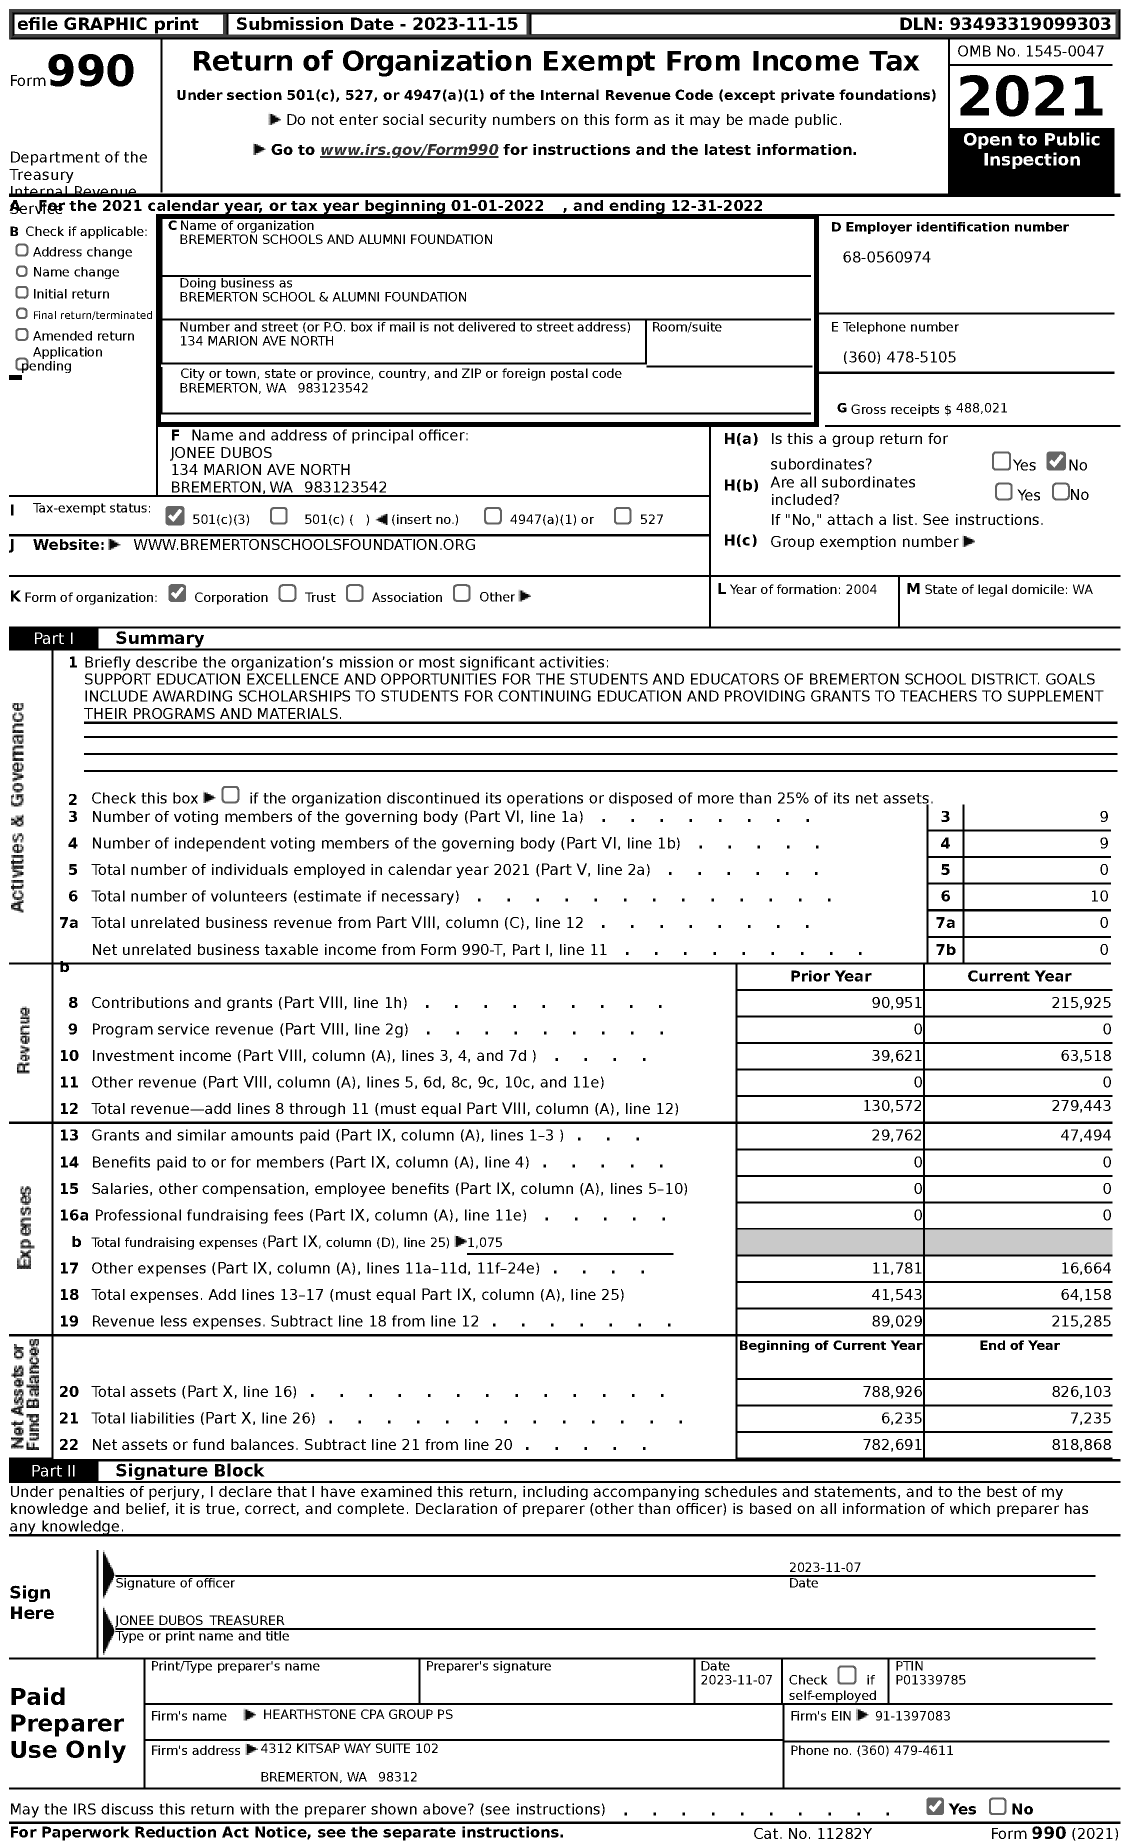 Image of first page of 2022 Form 990 for Bremerton Schools and Alumni Foundation